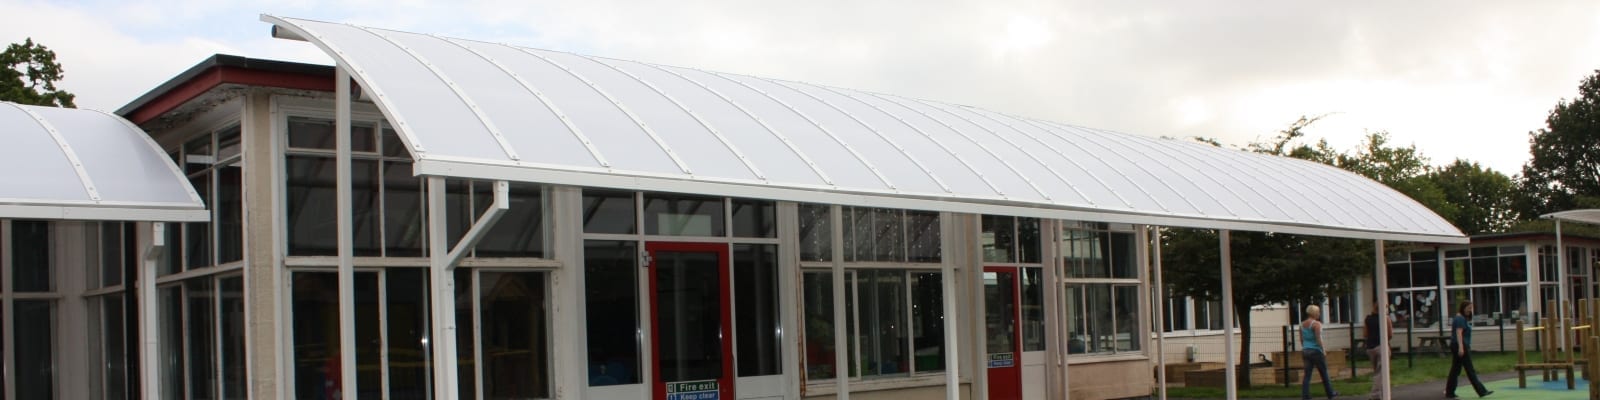 Yew Tree School Curved Roof Canopy